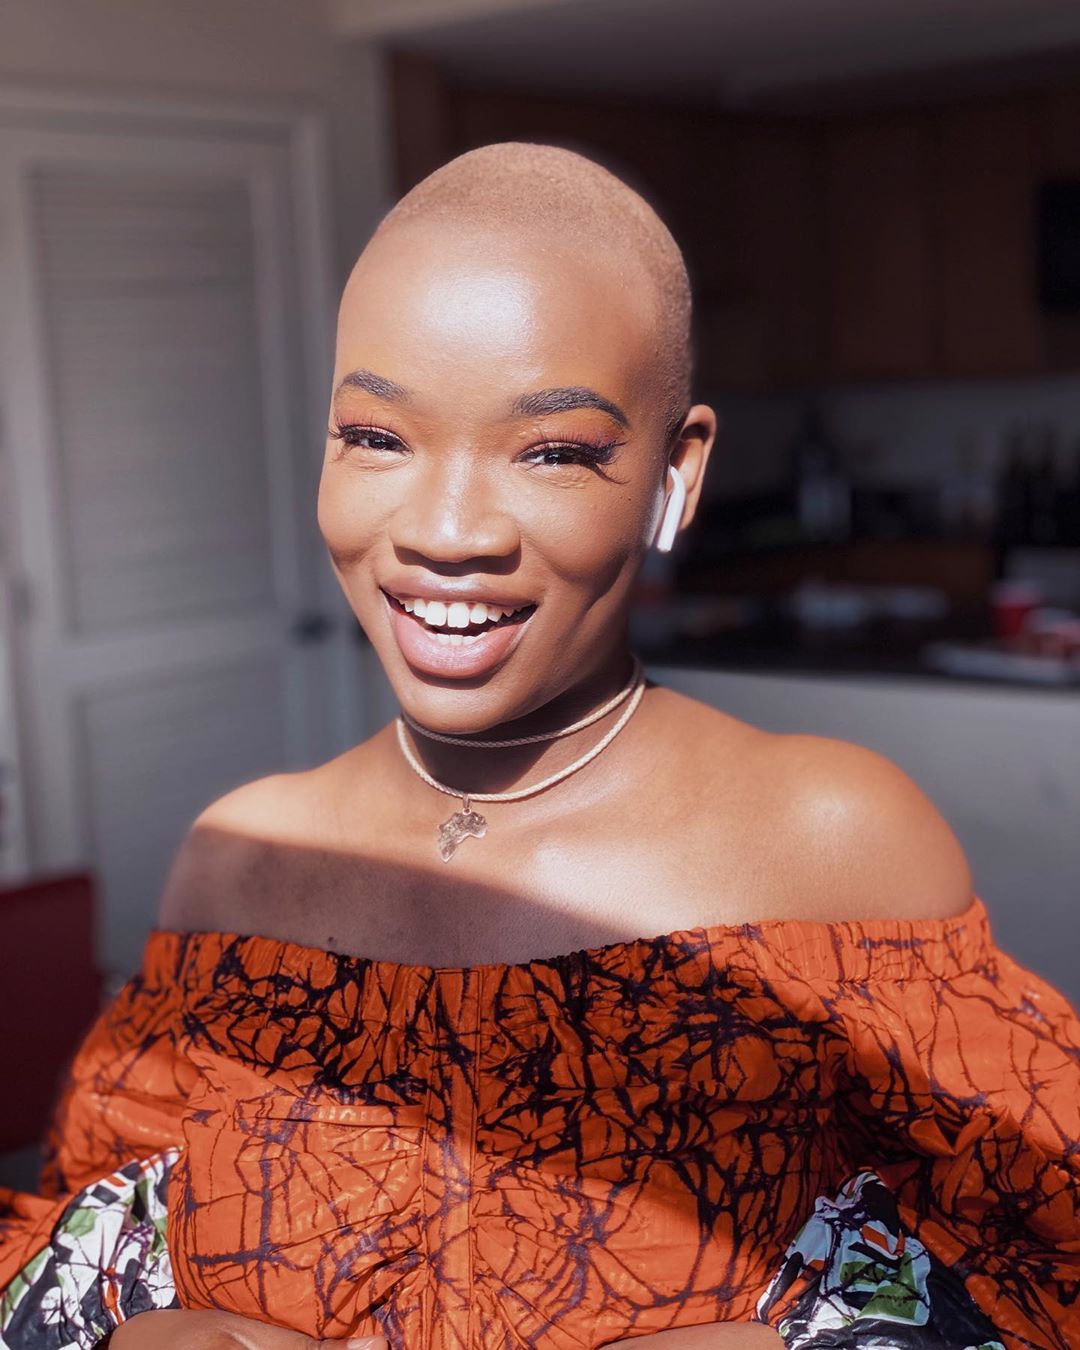 21 Bald Black Women That Make Us Want To Shave Our Heads - Essence